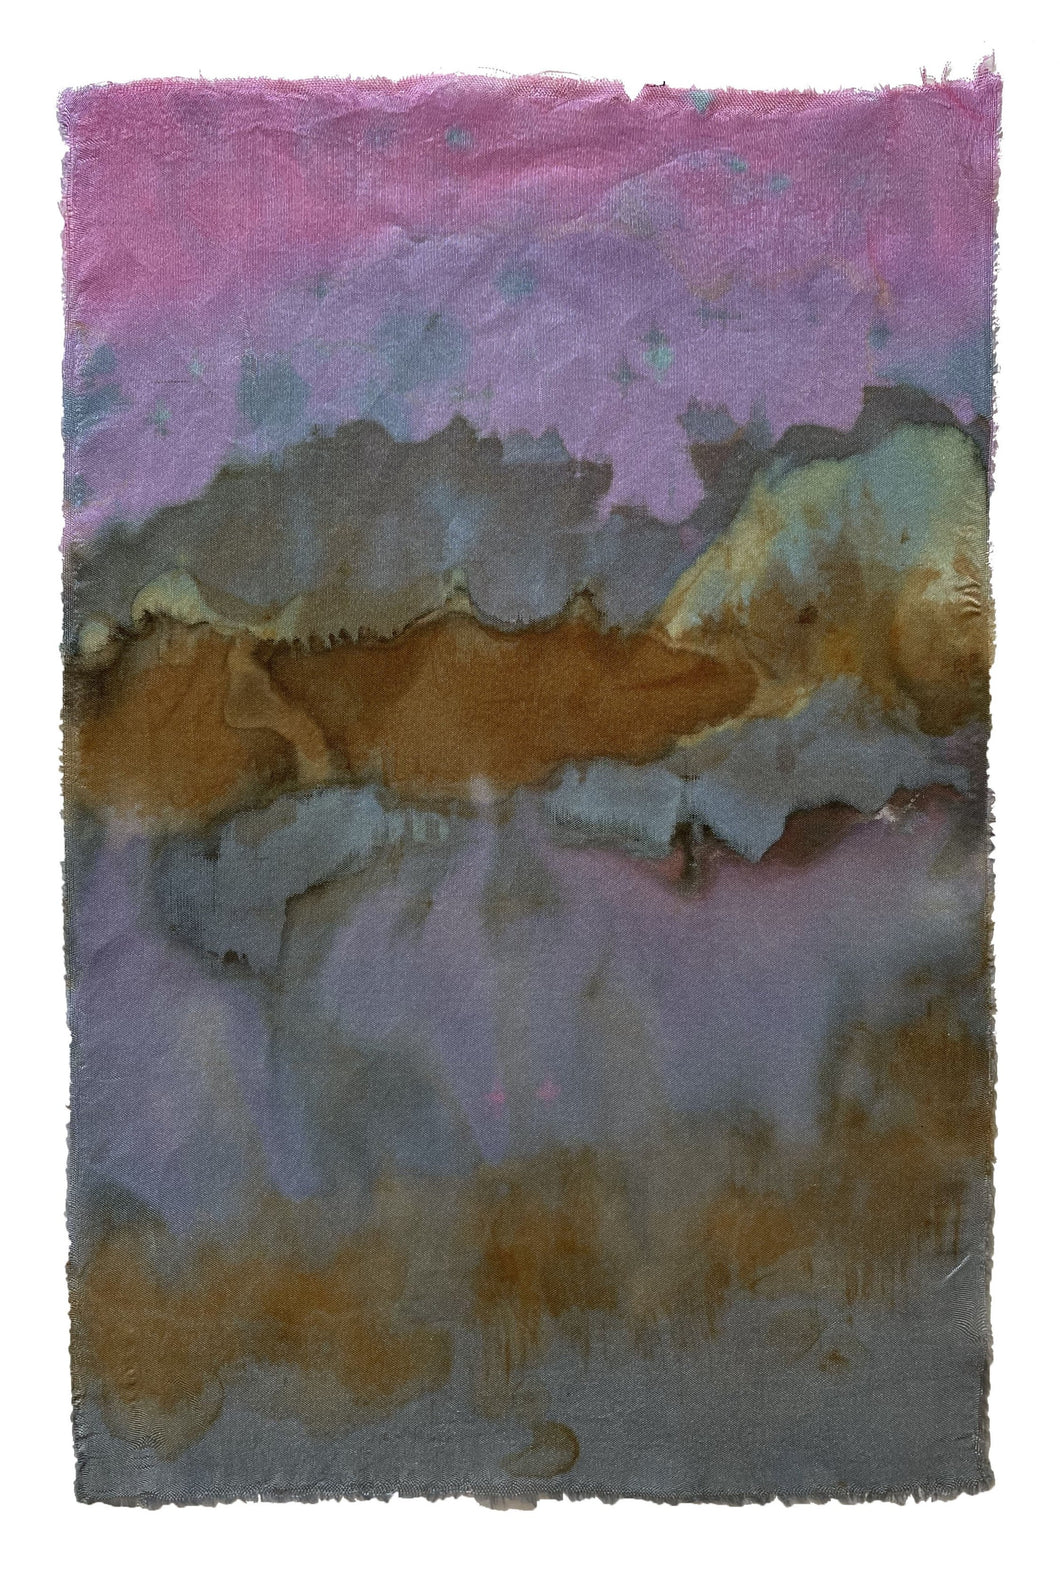 seascape 1 - naturally dyed textile